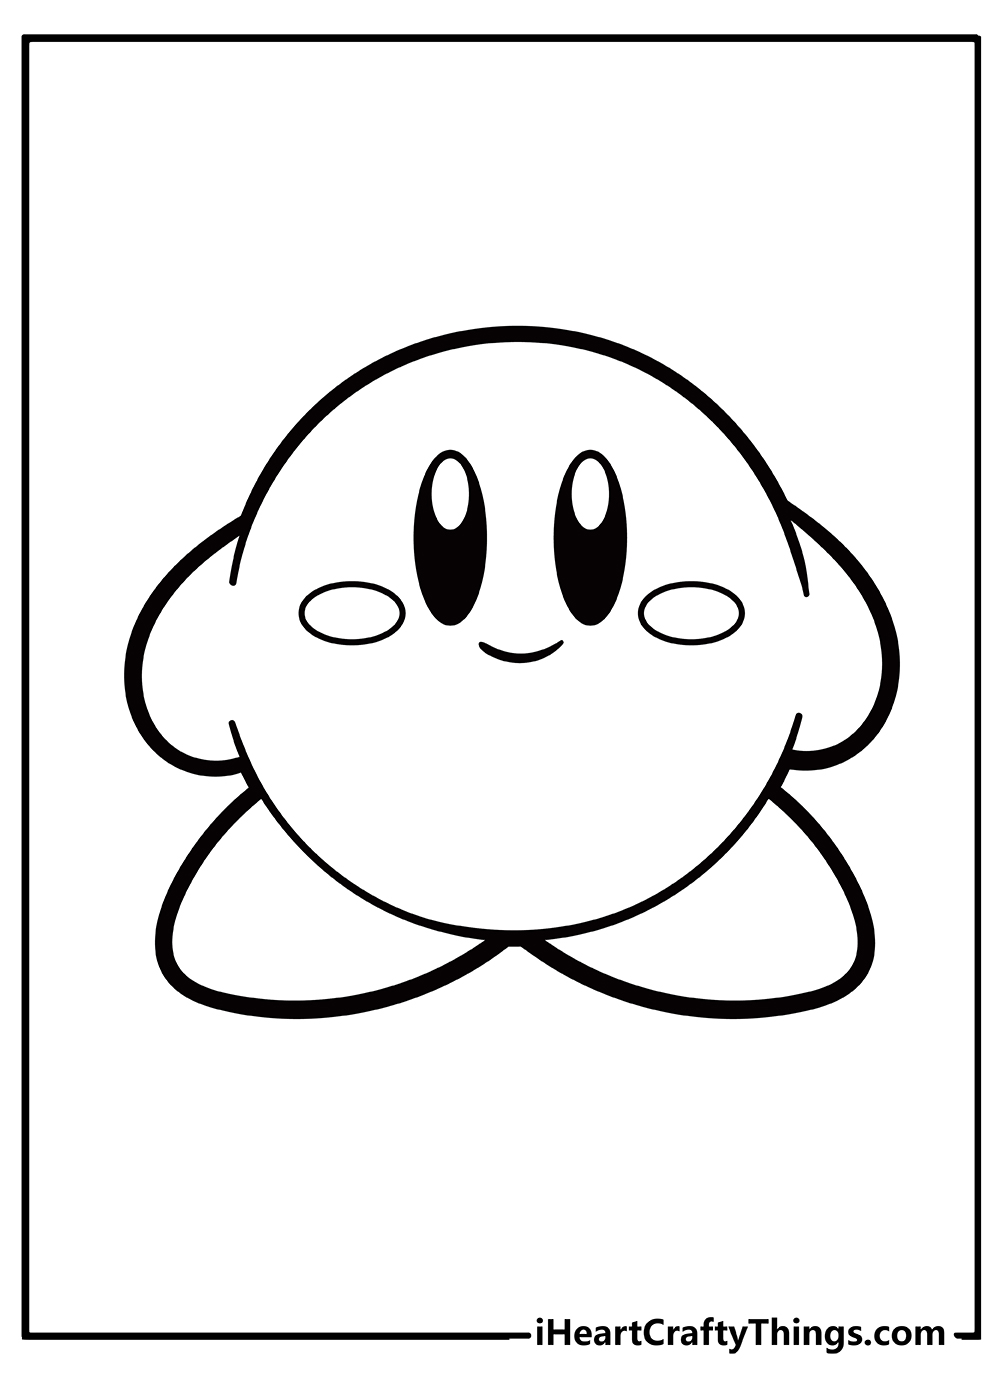 Kirby coloring pages free printables